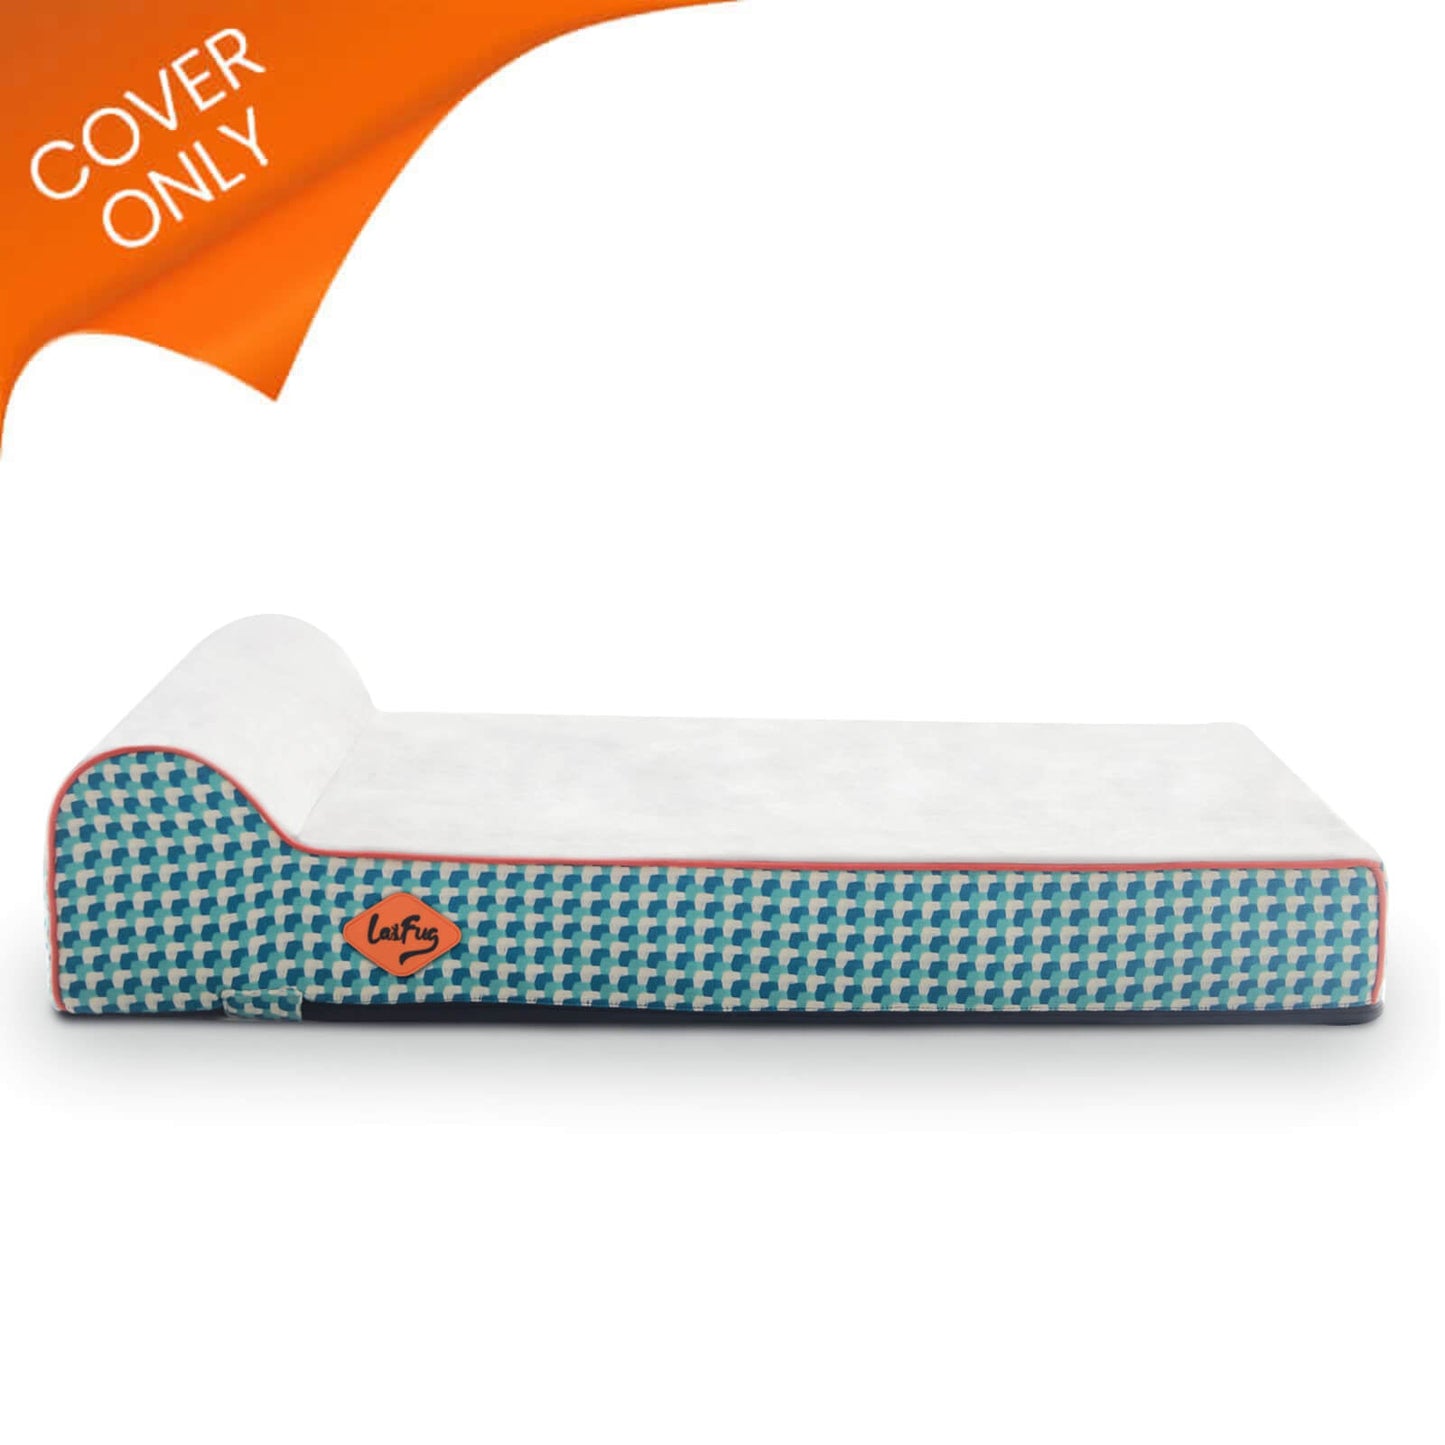 Laifug Dog Bed Replacement Cover 34"x22"x7"-2